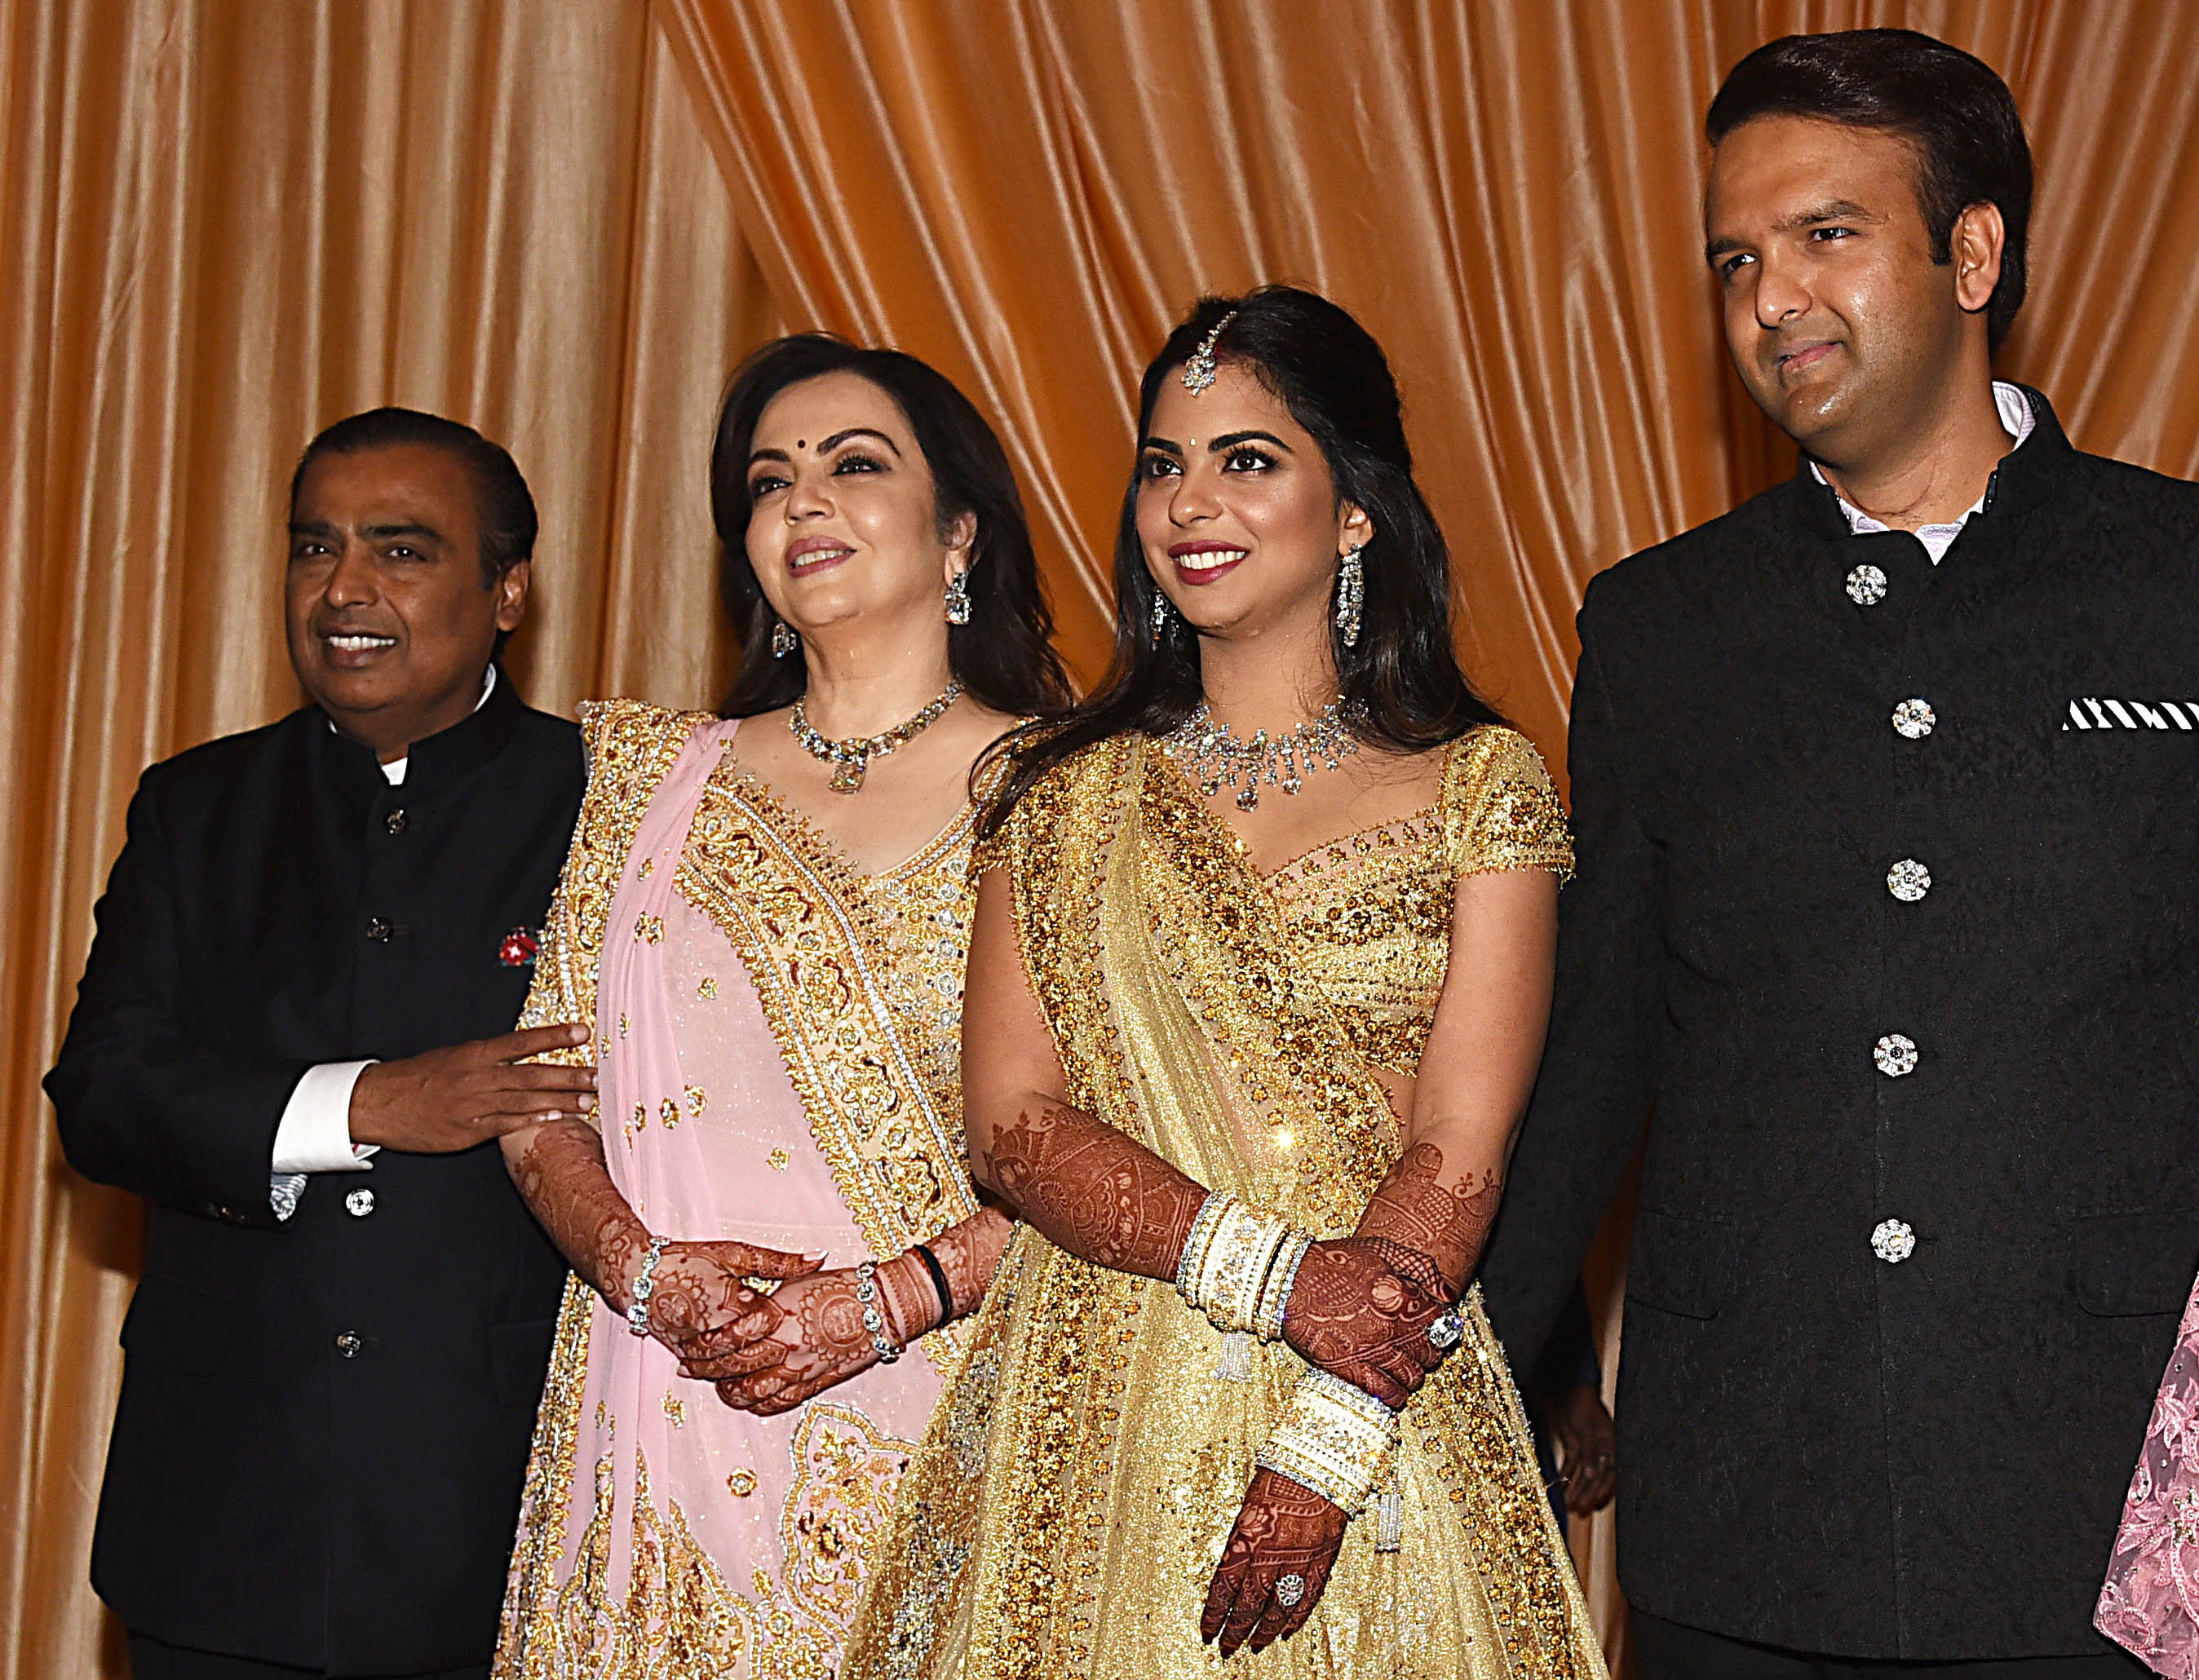 Mukesh and Nita Ambani with their daughter Isha and Anand Piramal during Isha and Anand's wedding reception in Mumbai, India on December 14, 2018 | Source: Getty Images